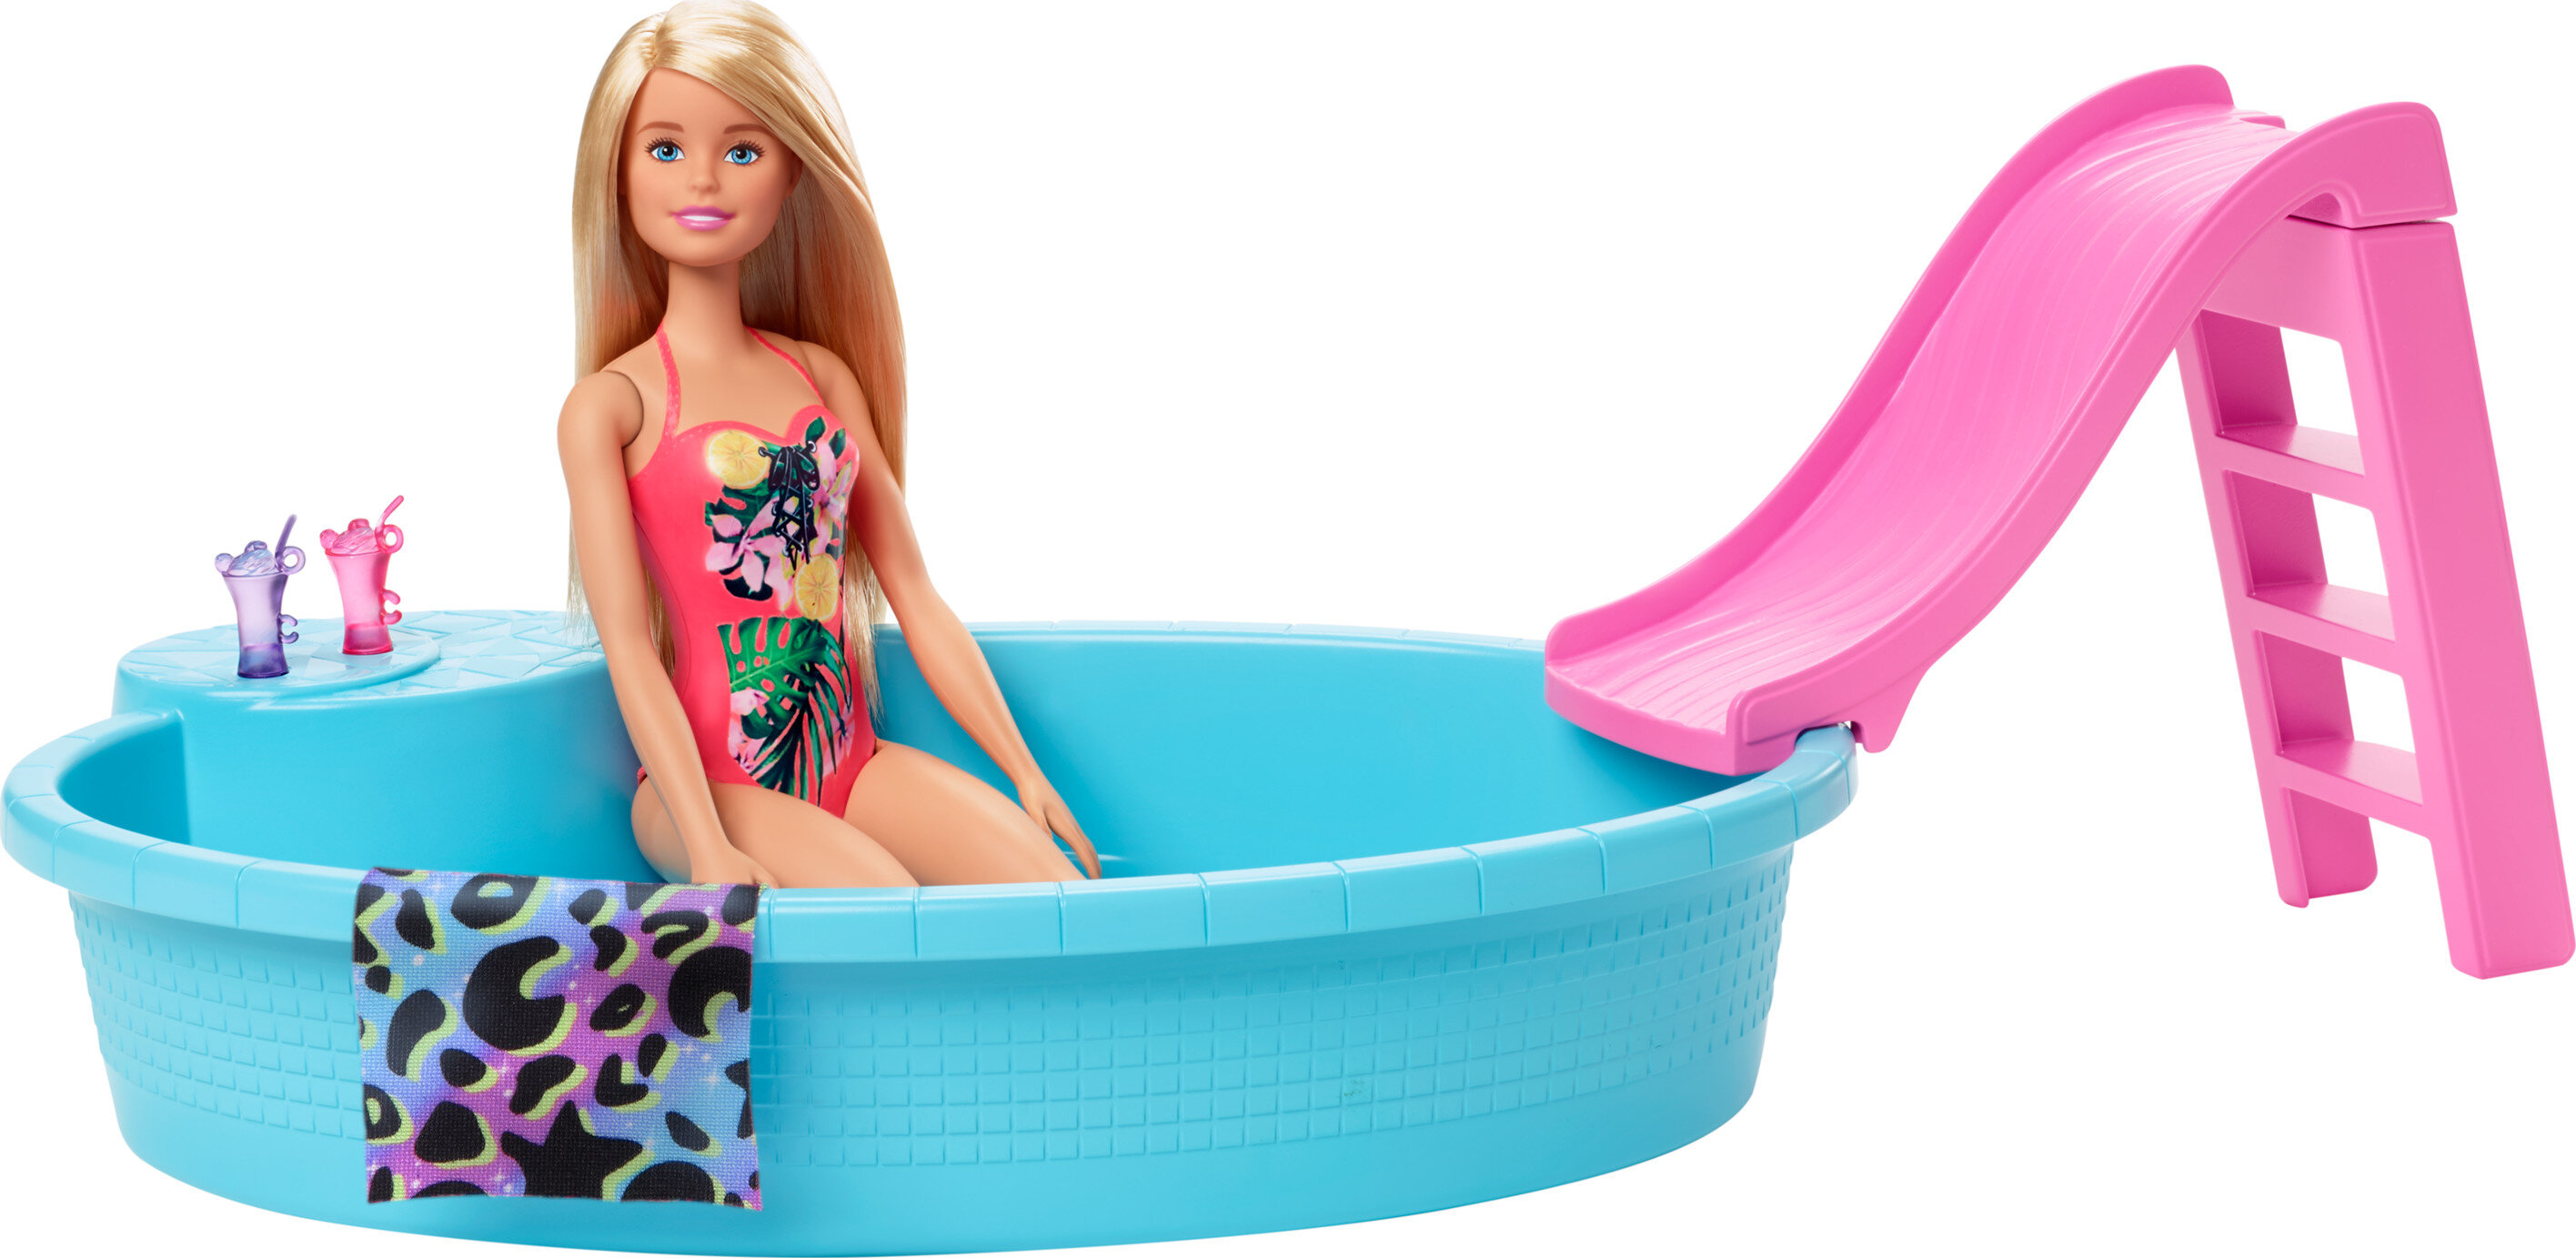 Barbie Doll and Pool Playset with Slide and Accessories, Blonde in Tropical Swimsuit - image 1 of 6